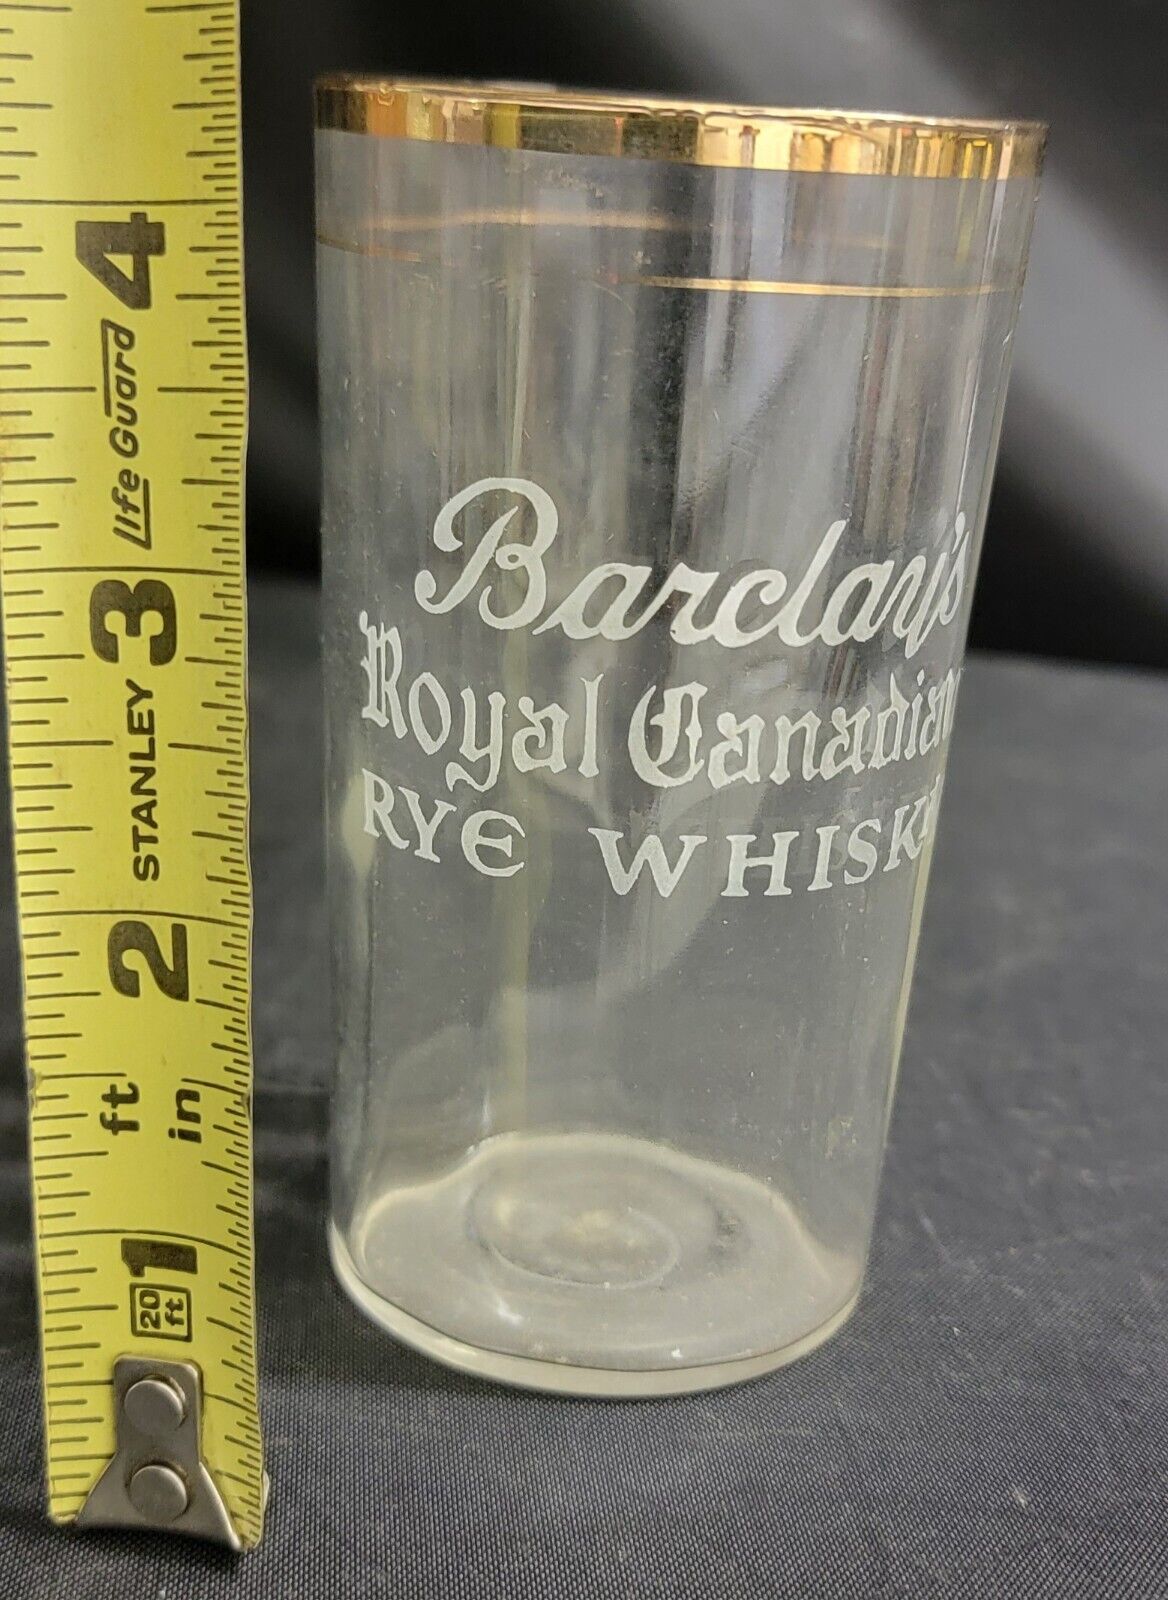 Barclay\'s Royal Canadian Rye Whisky Etched glass